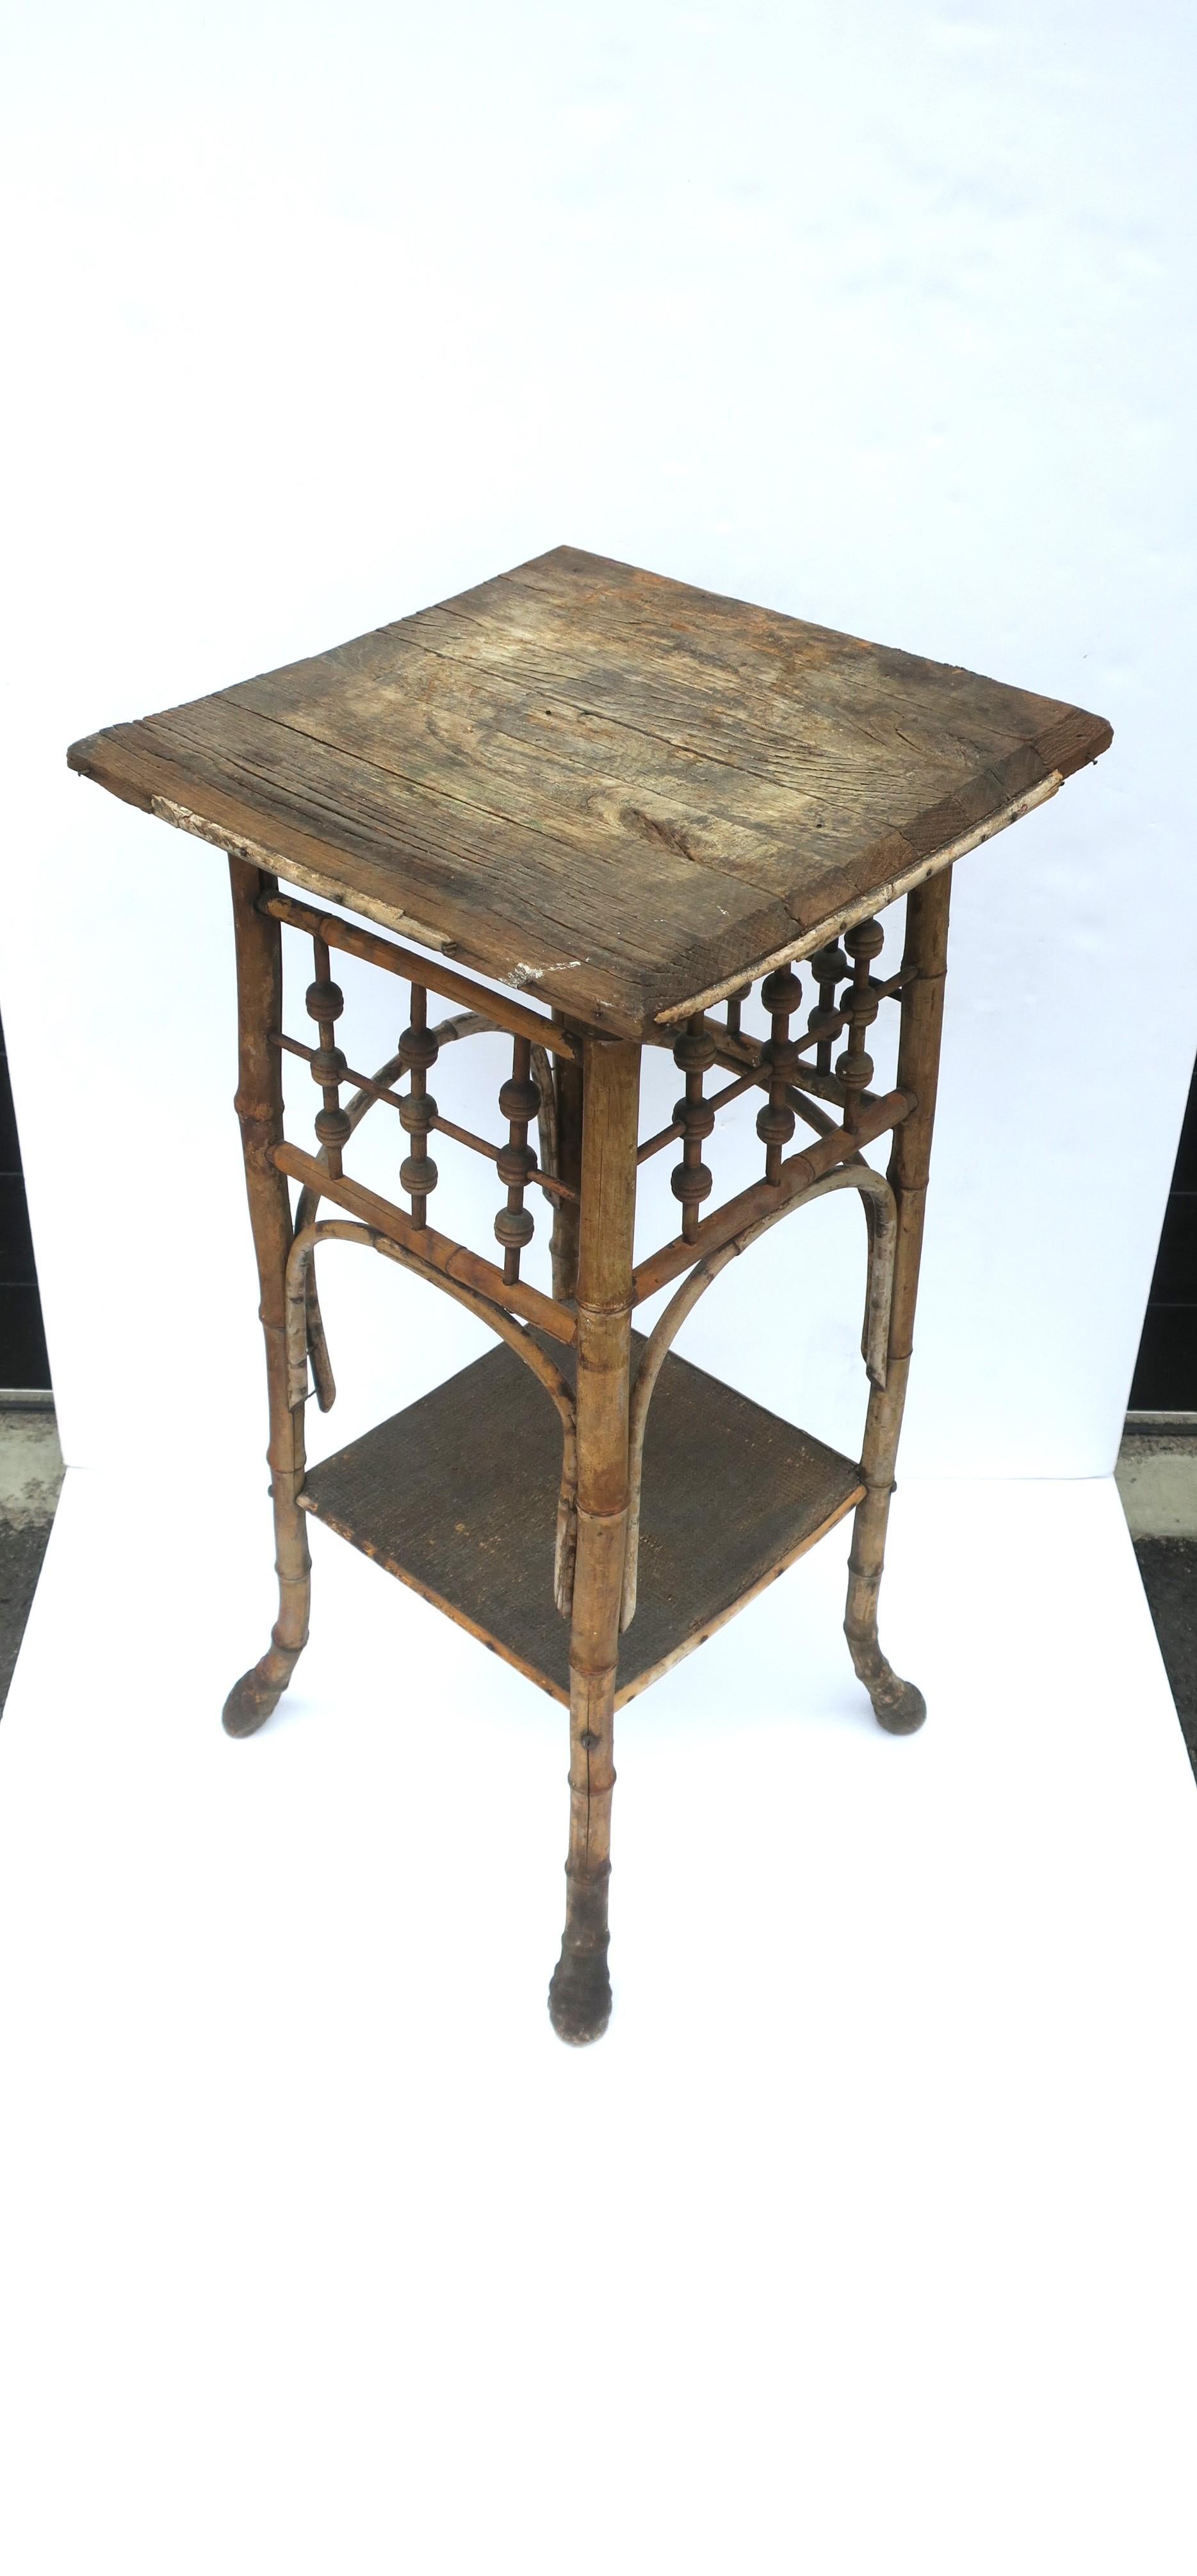 A rustic and beautifully weathered hand-crafted wood and bamboo side/end/accent table with lower shelf, Victorian, circa early-20th century. A versatile table, sound and stable. Dimensions: 14.25